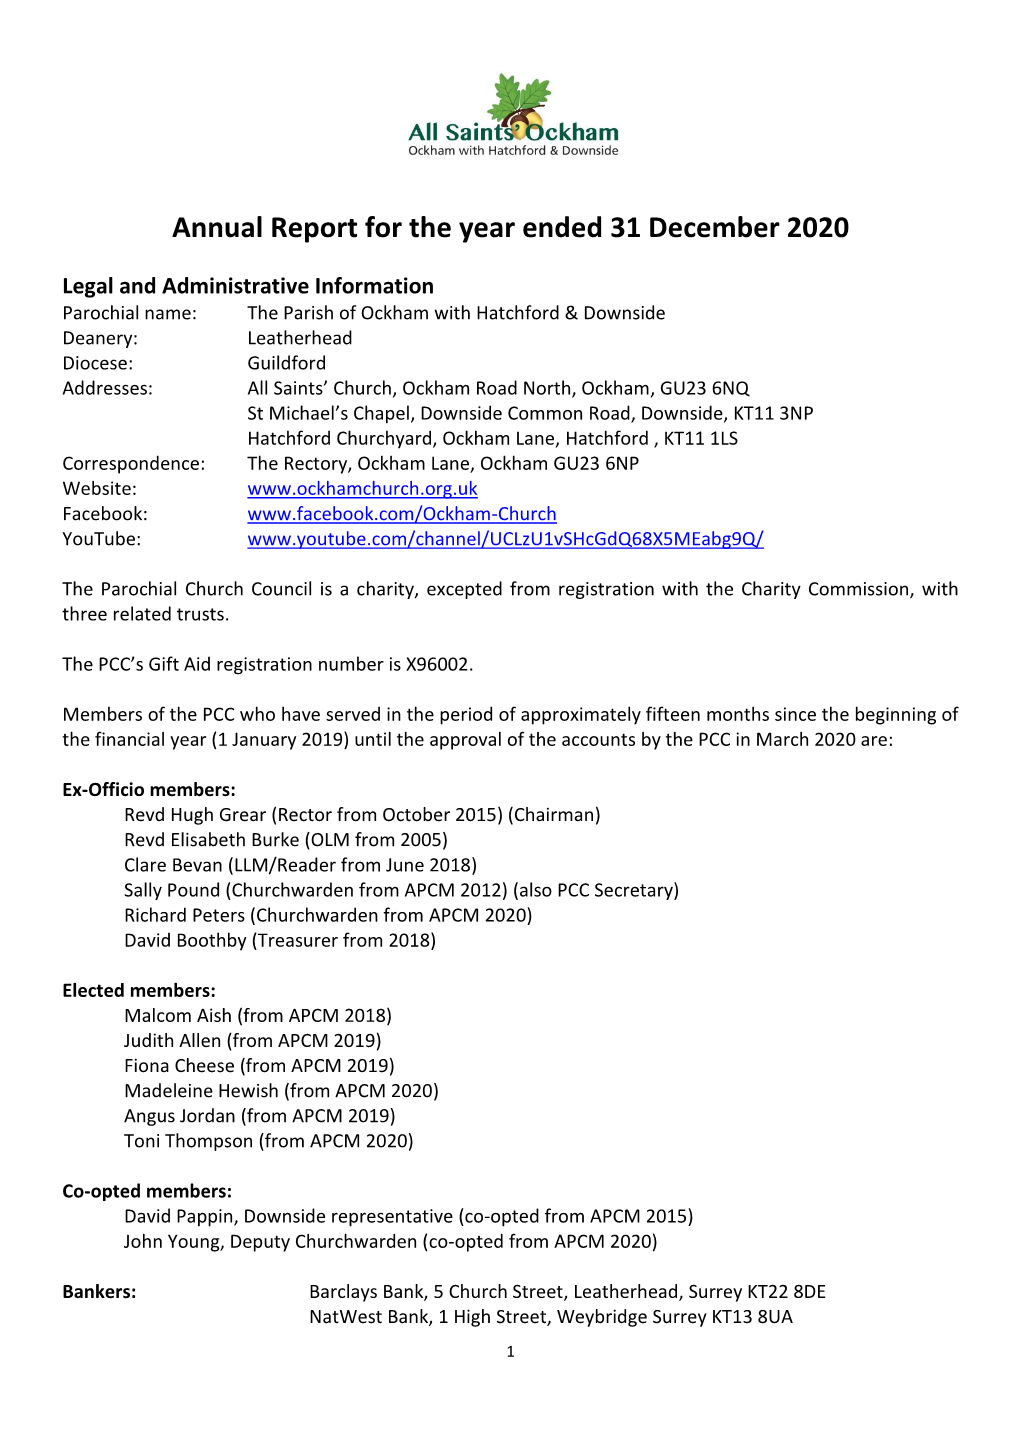 Annual Report for the Year Ended 31 December 2020